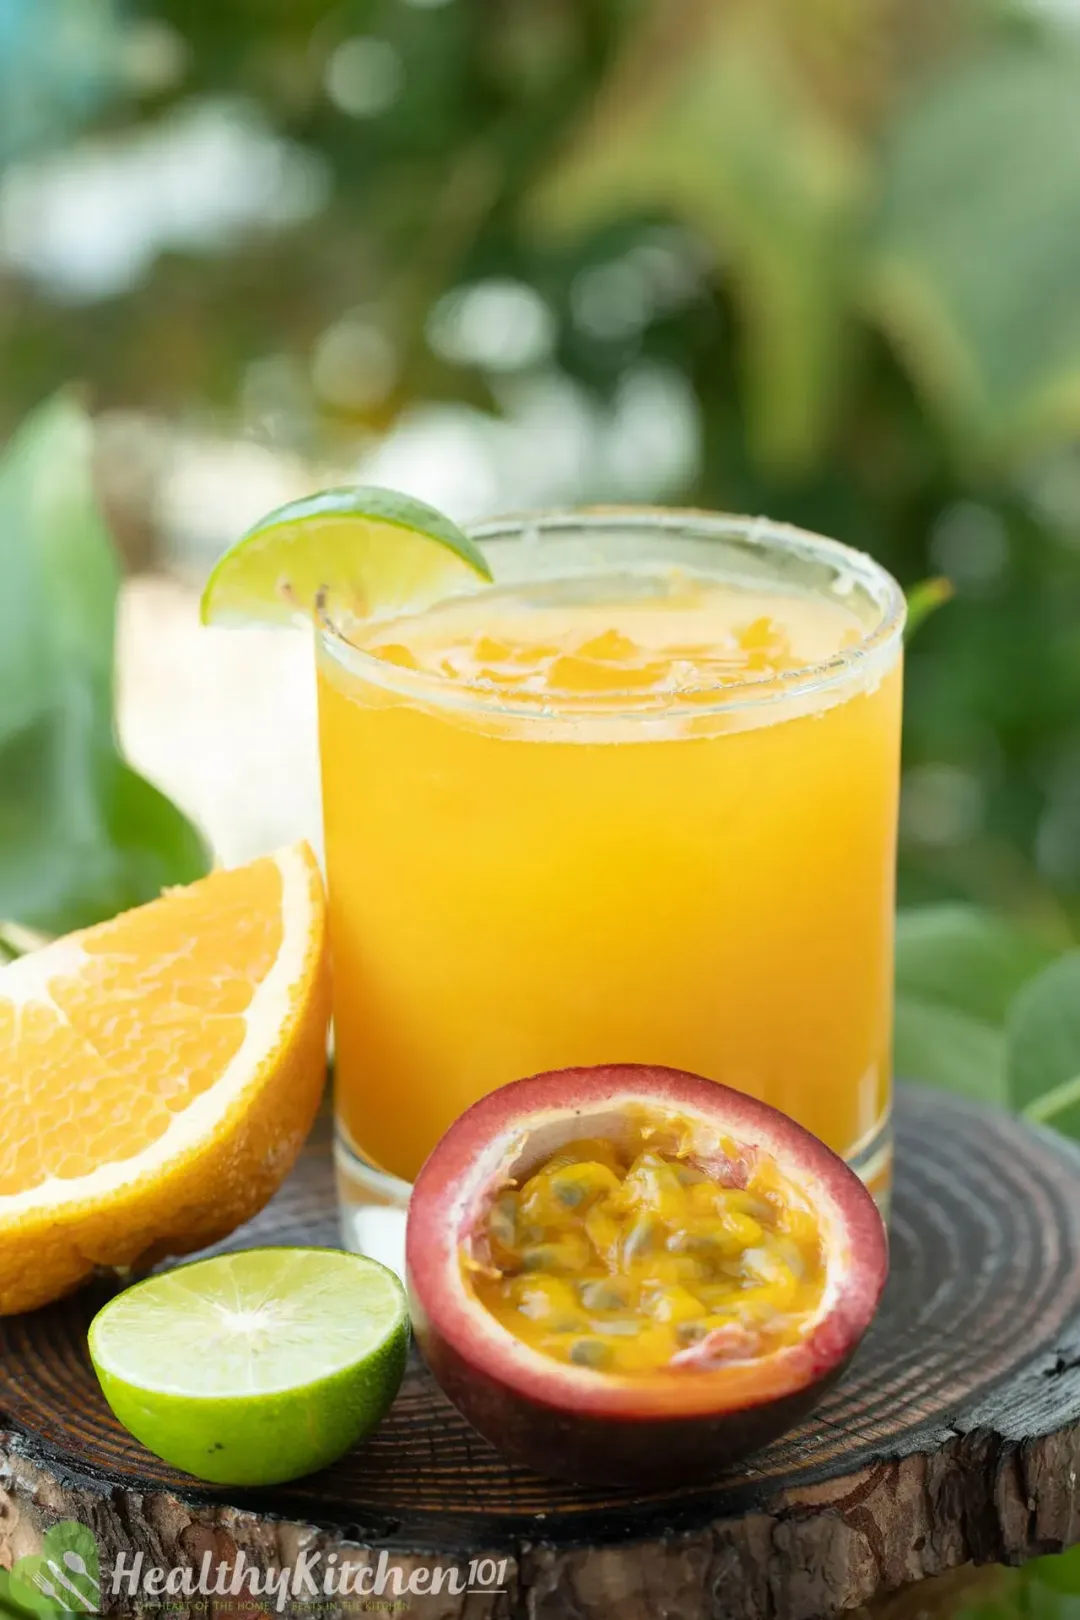 A short glass of passion fruit margarita next to an orange wedge, lime half, and halved passion fruit